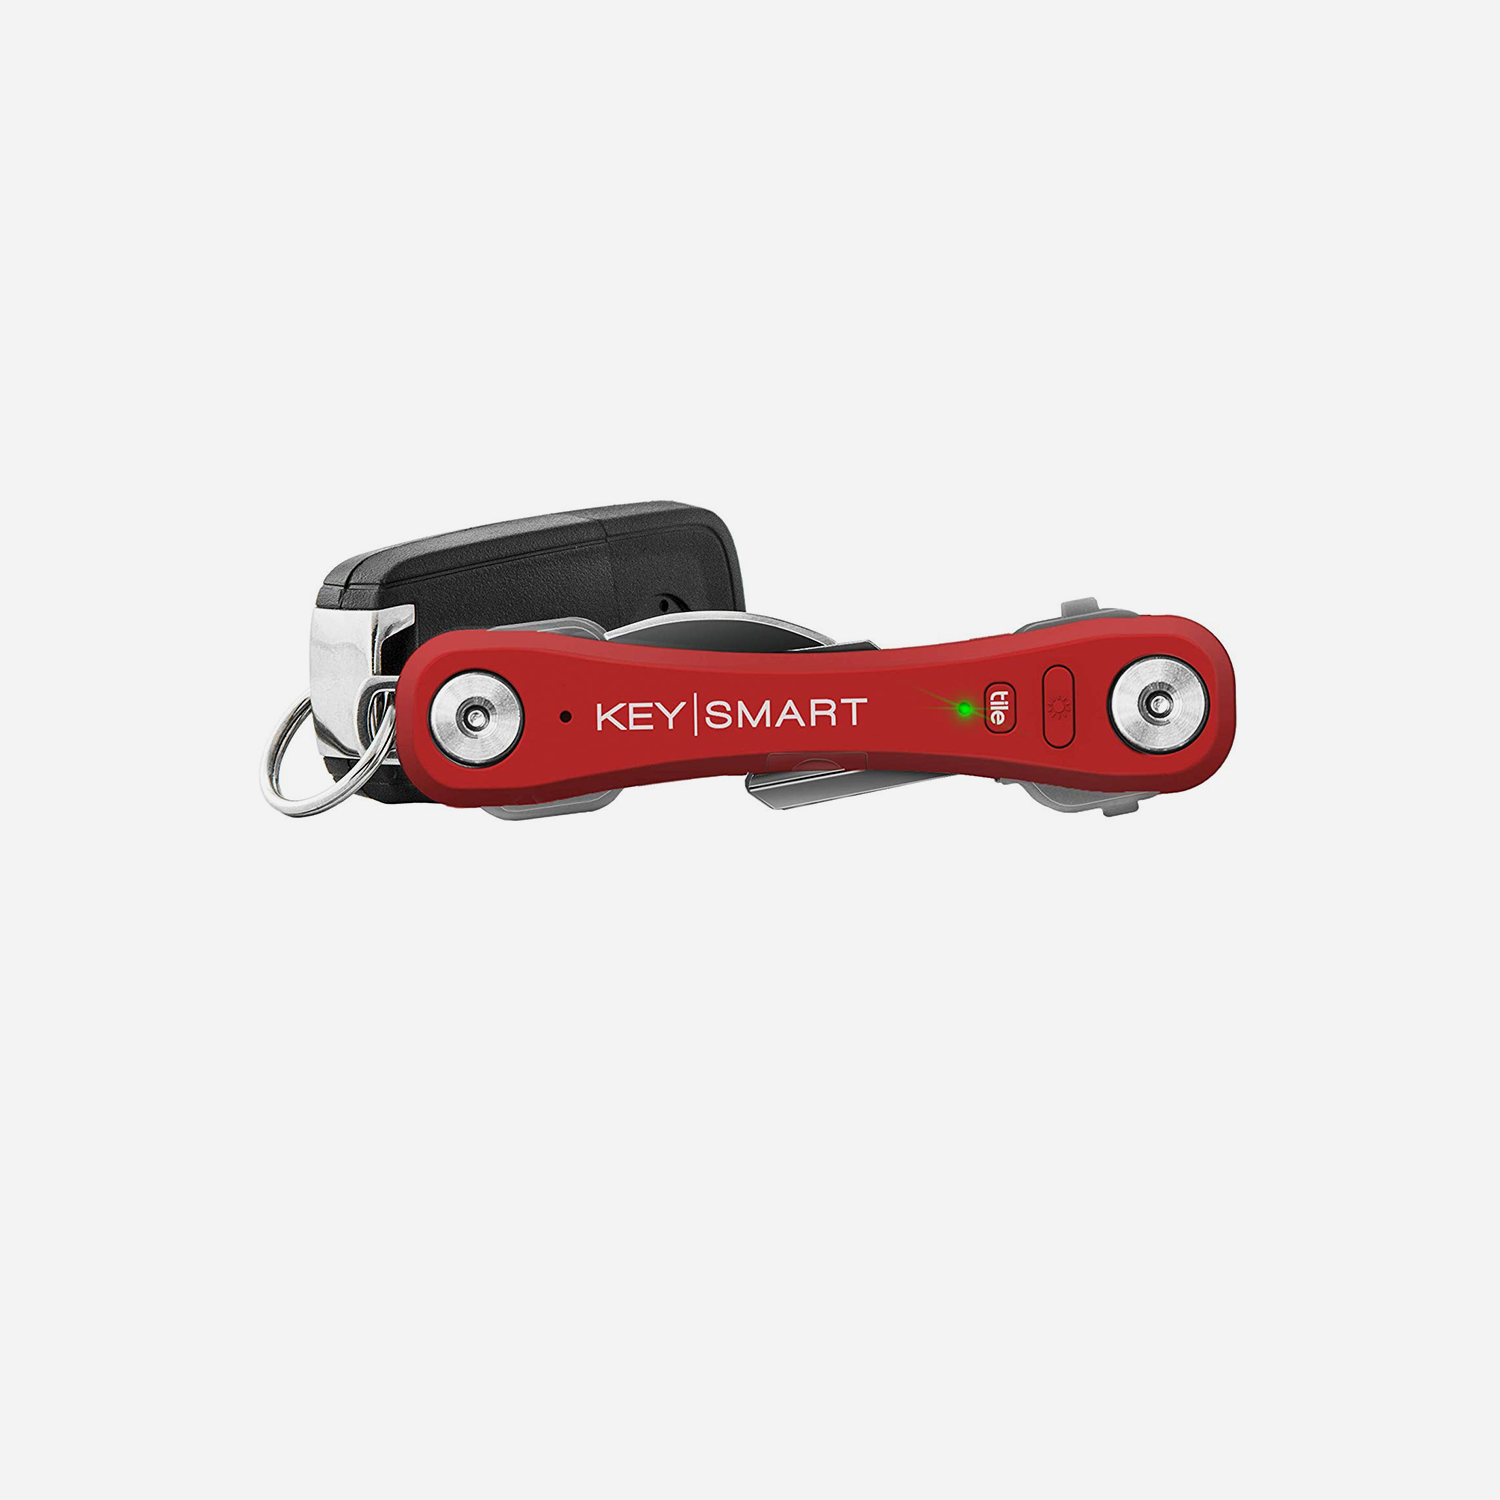 KeySmart® Pro w/ Tile | Works With Tile App for Android & iOS | Locate Lost Keys